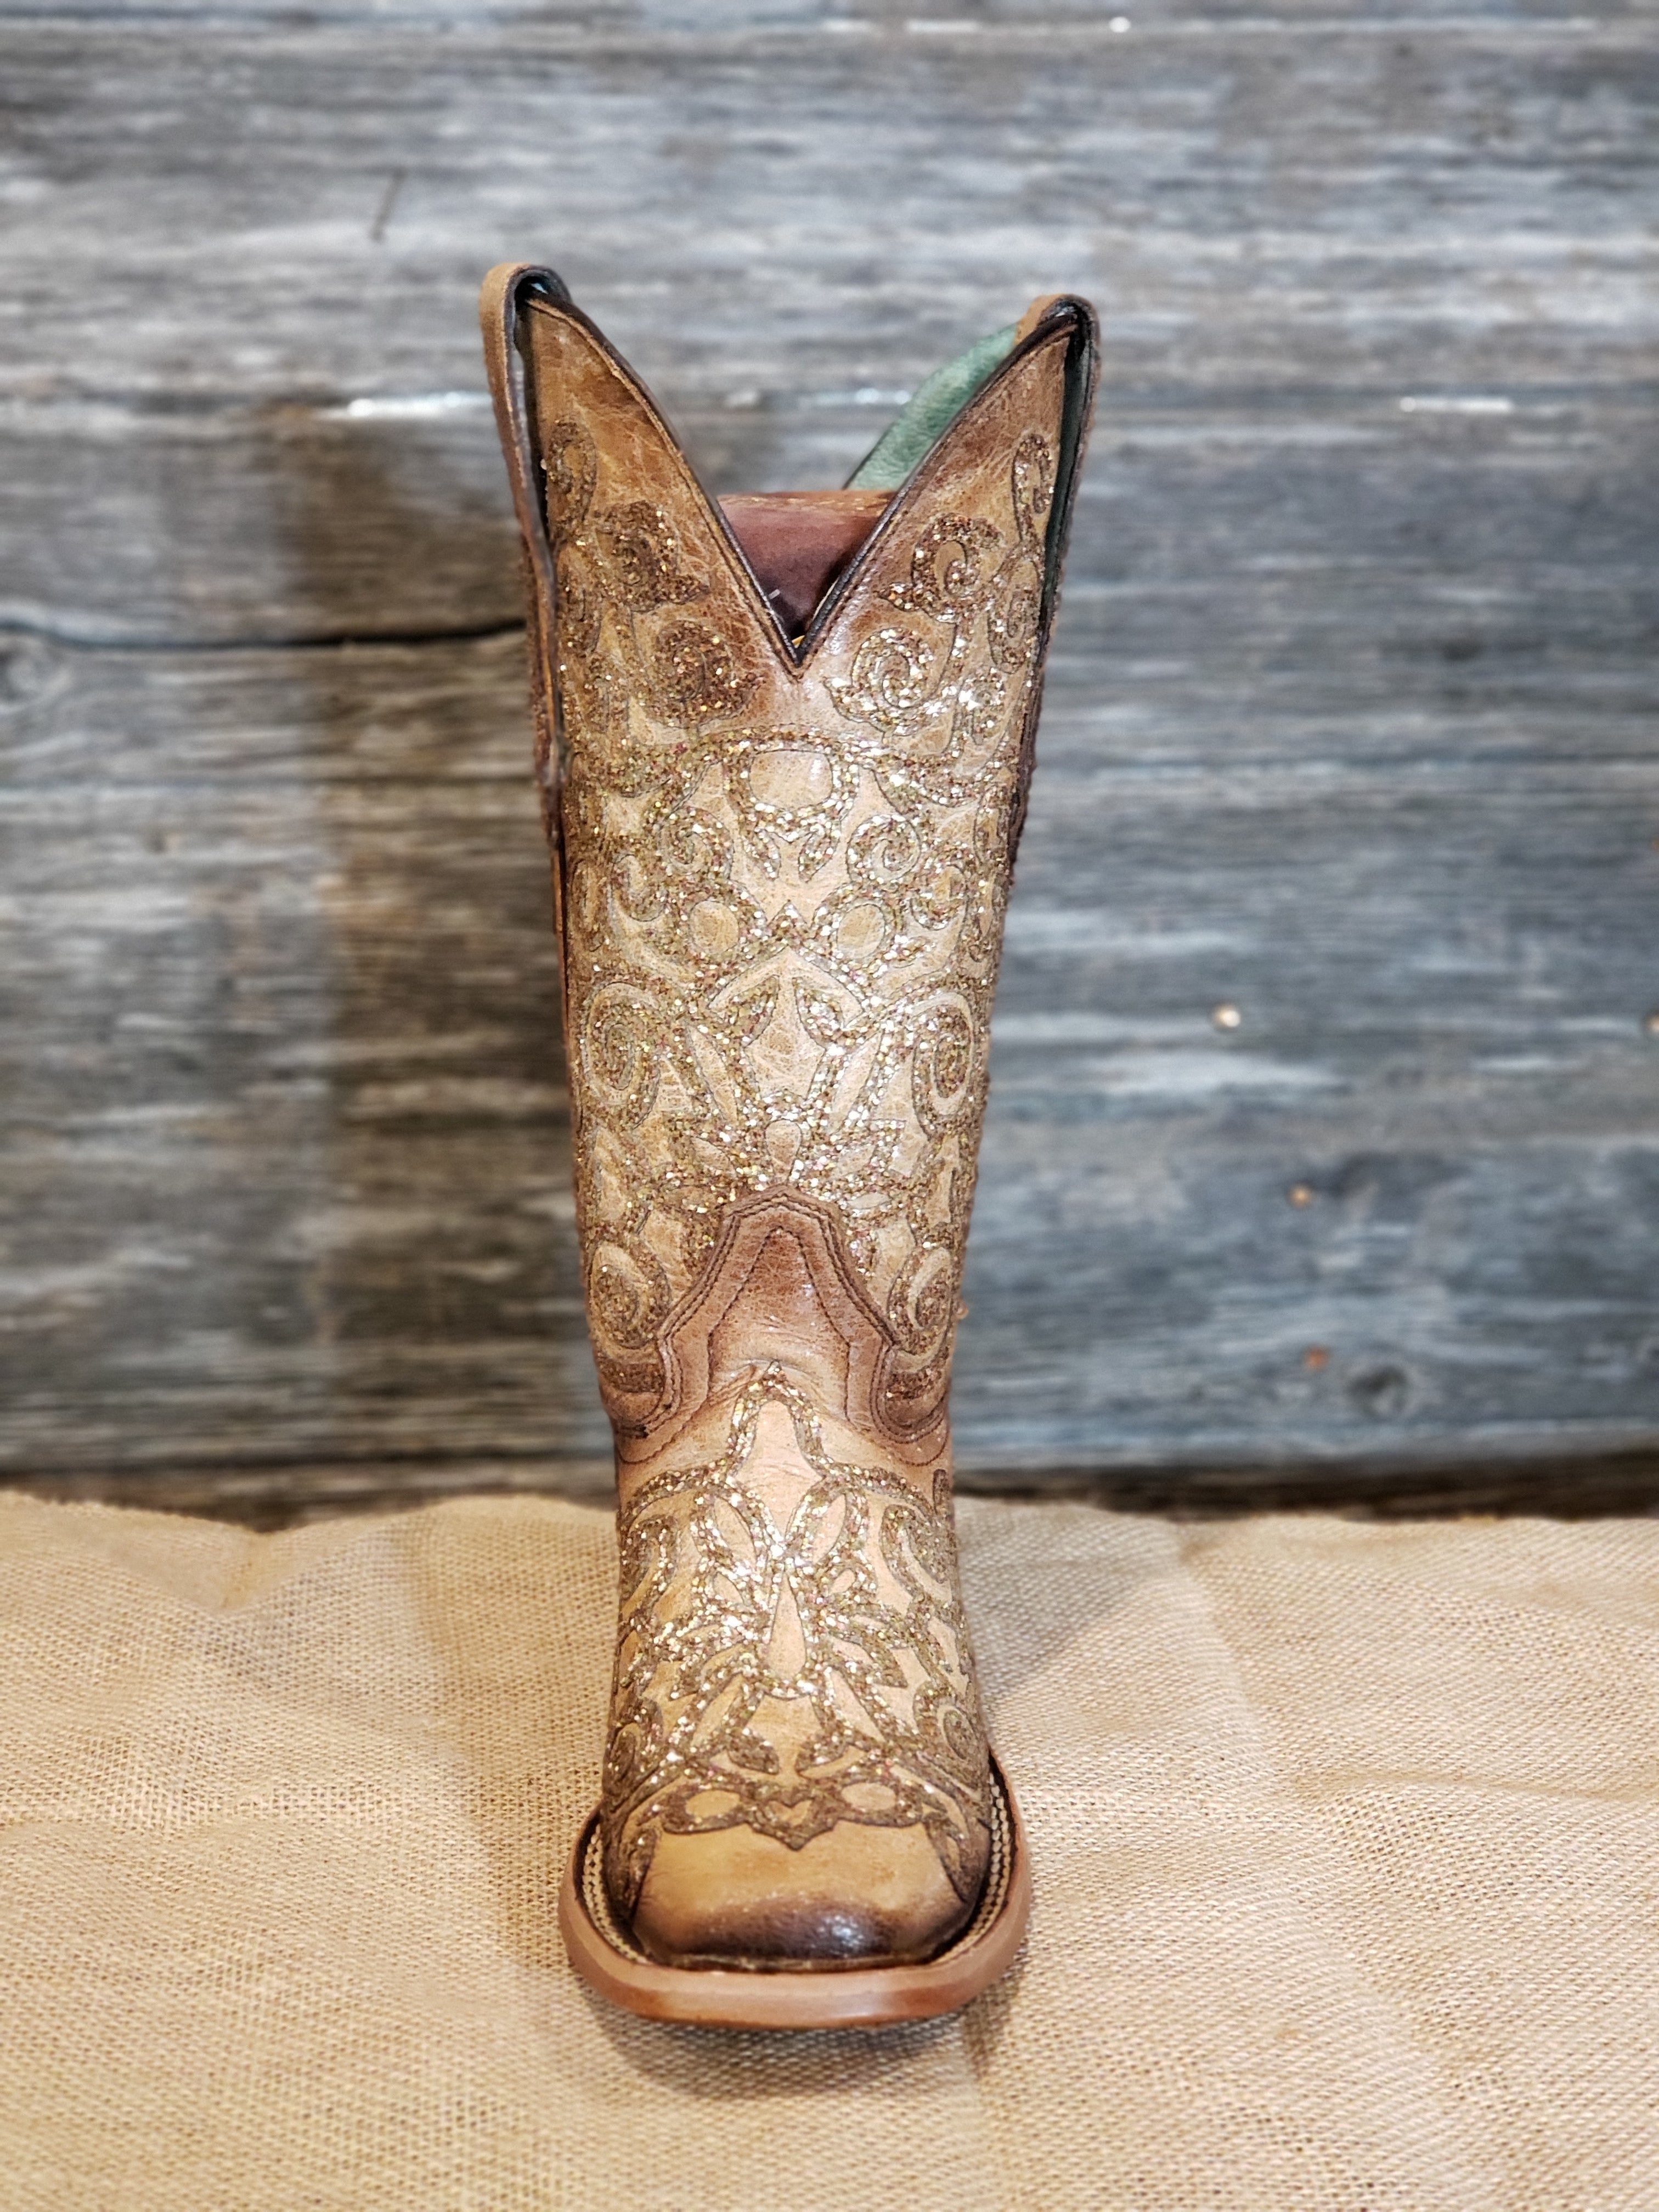 Corral Saddle Gold Glitter Overlay Embroidery Square Toe Boot C3772